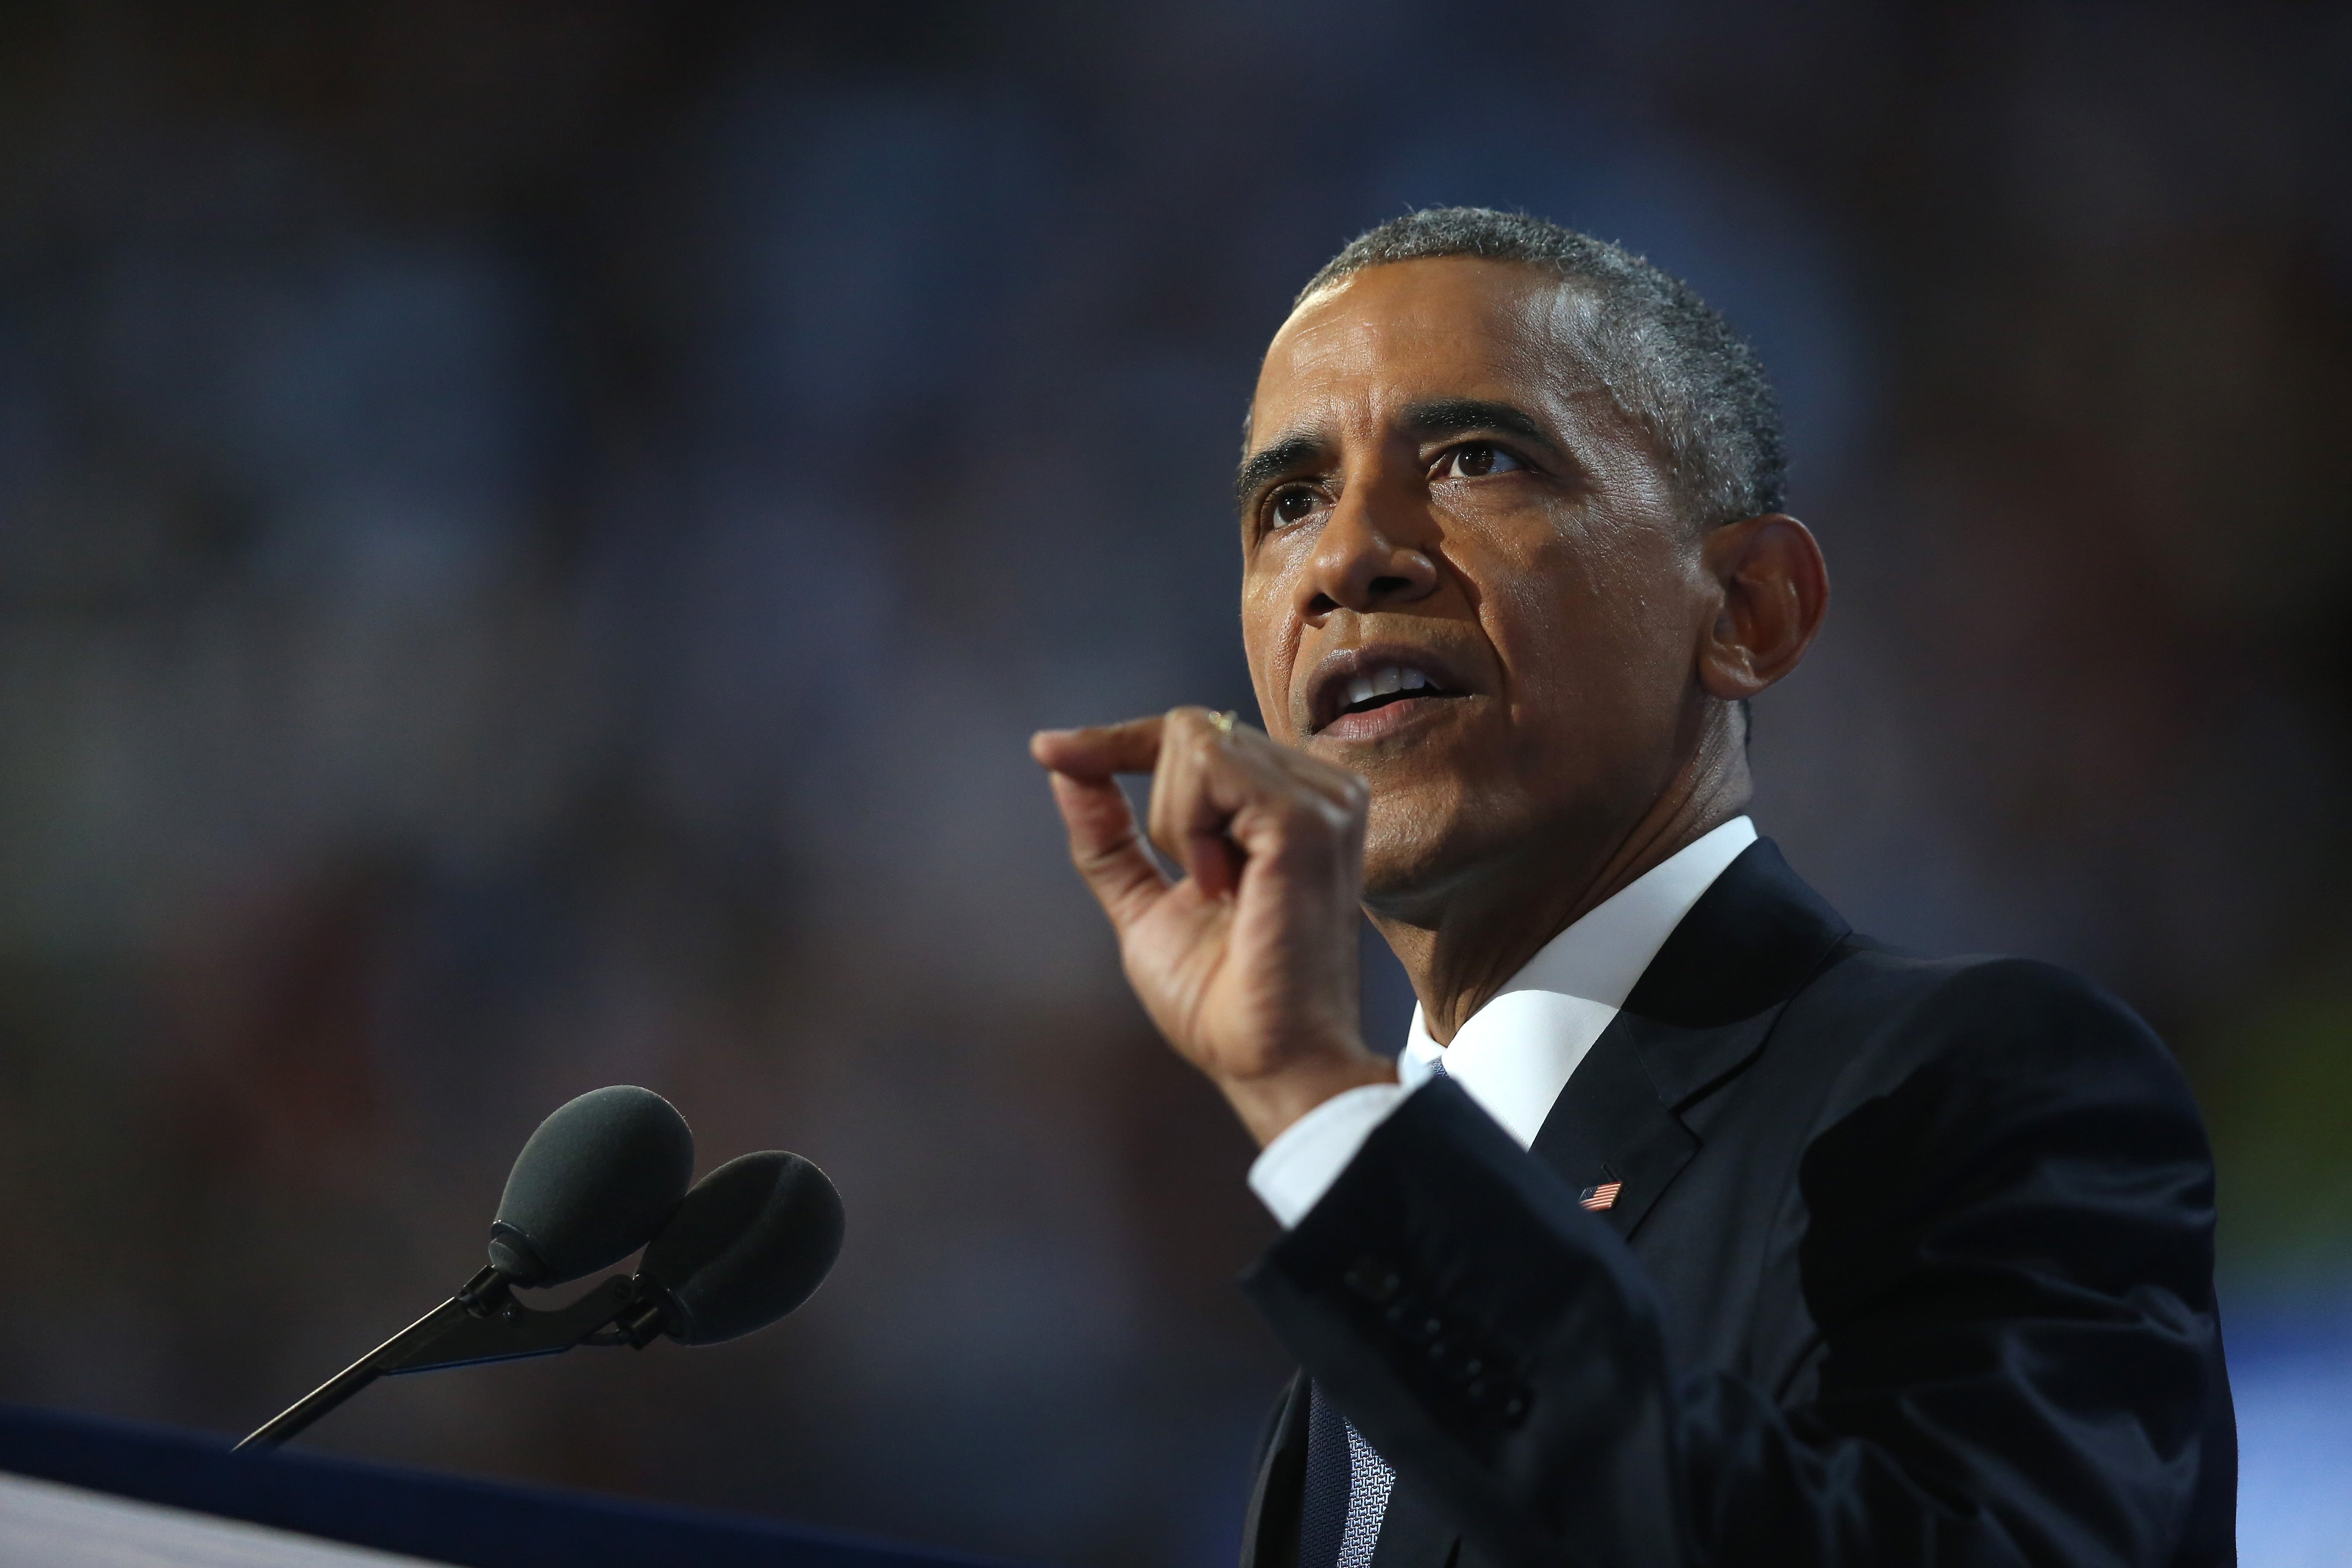 President Obama: The Black Vote Is Not As Solid As It Needs To Be